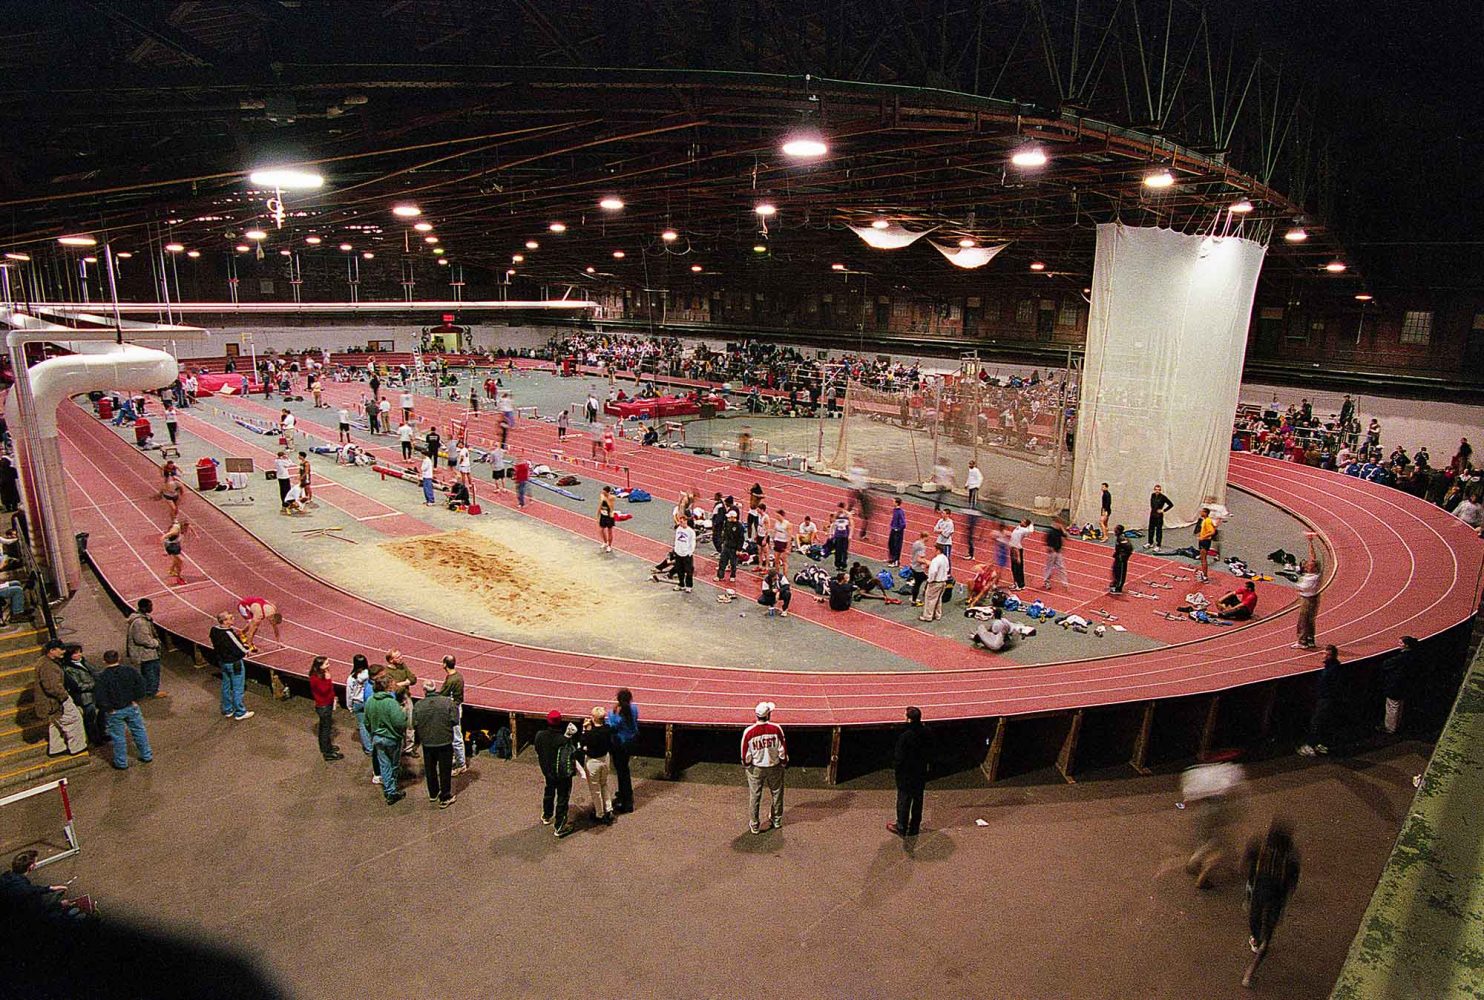 Video The Mystery behind BU’s RecordBreaking Indoor Track BU Today